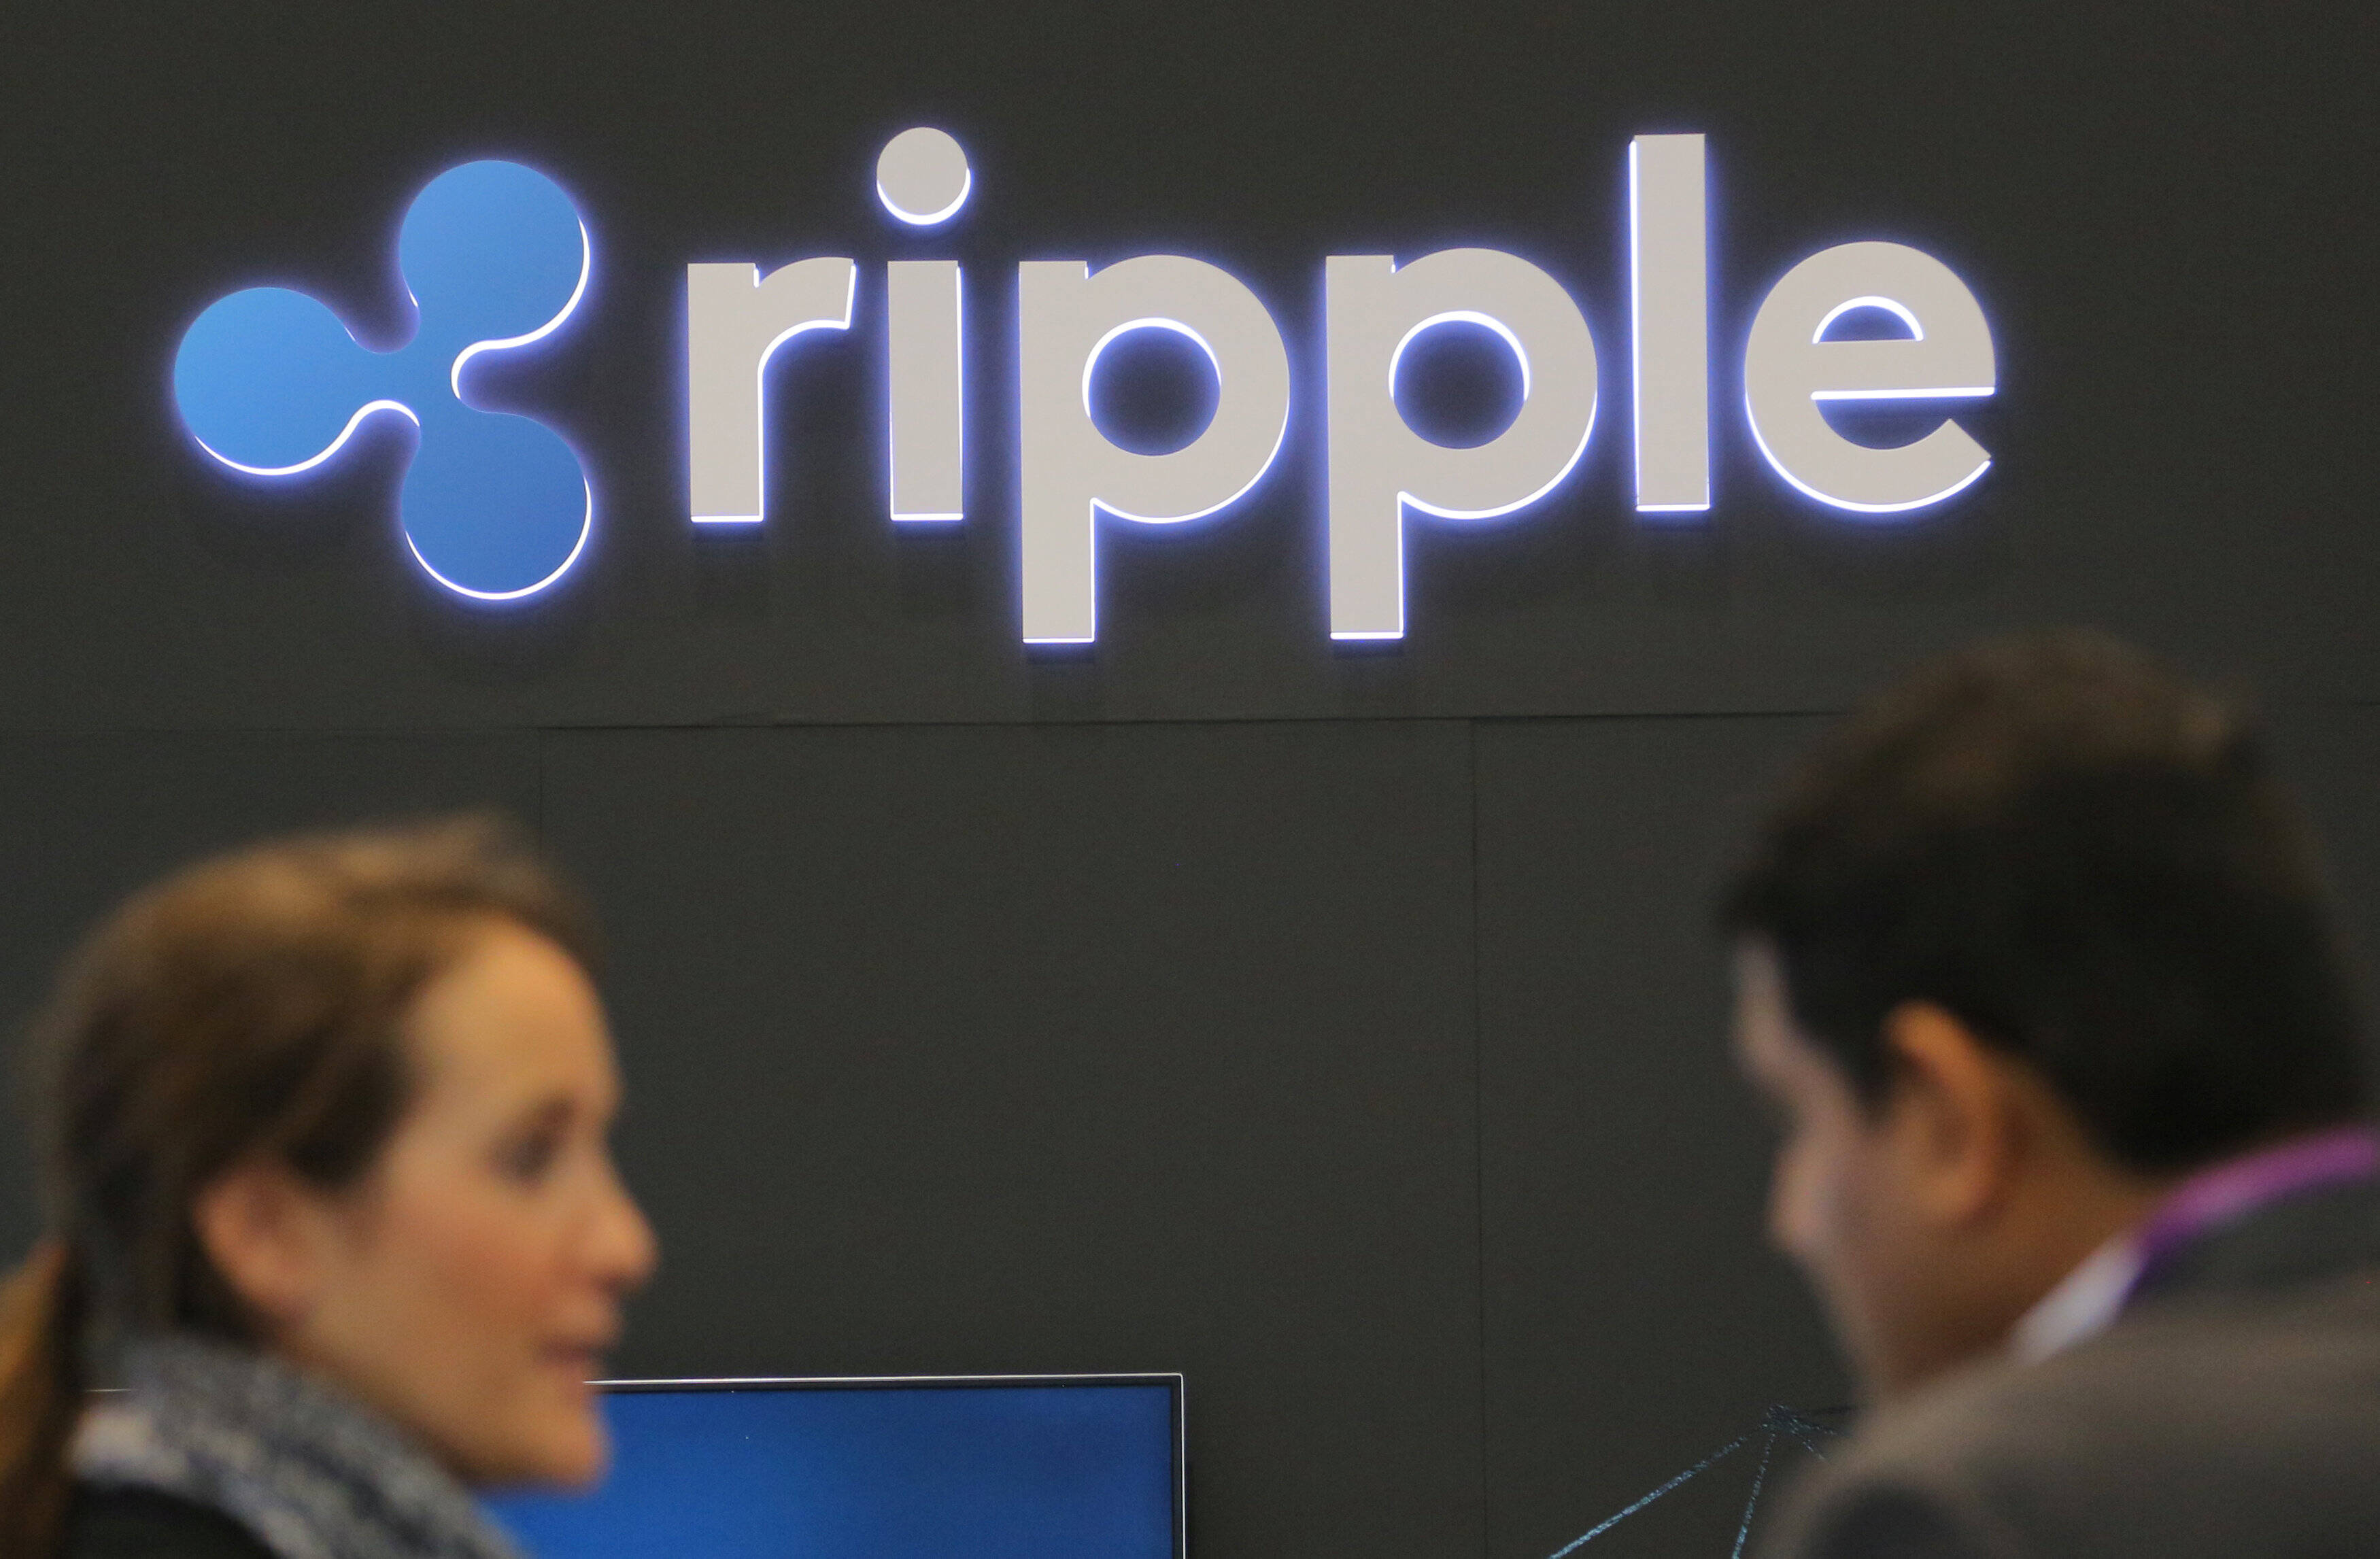 The logo of blockchain company Ripple is seen at the SIBOS banking and financial conference in Toronto, Ontario, Canada October 19, 2017. Picture taken October 19, 2017. REUTERS/Chris Helgren